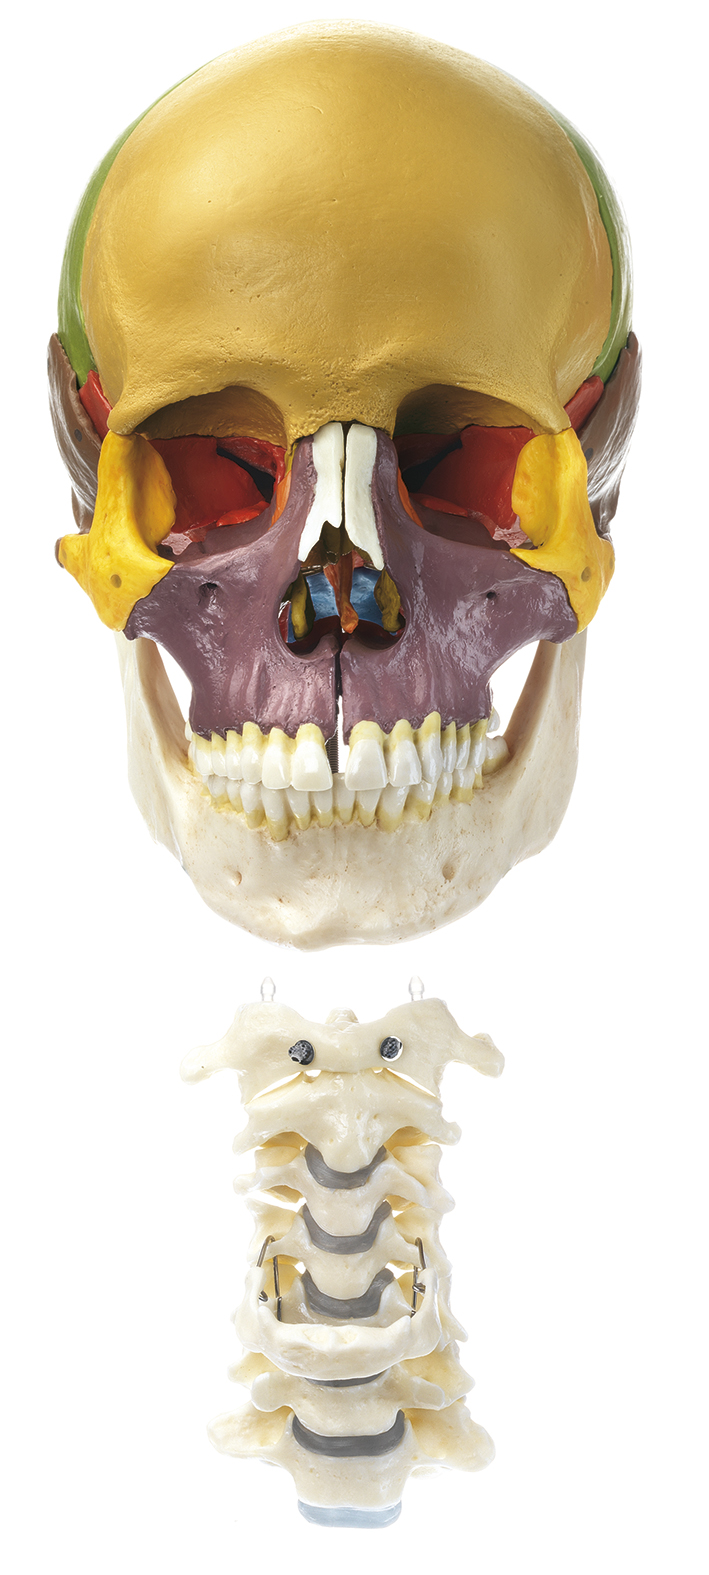 18-Pieces Model of the Skull with CervicaVertebral Column and Hyoid Bone